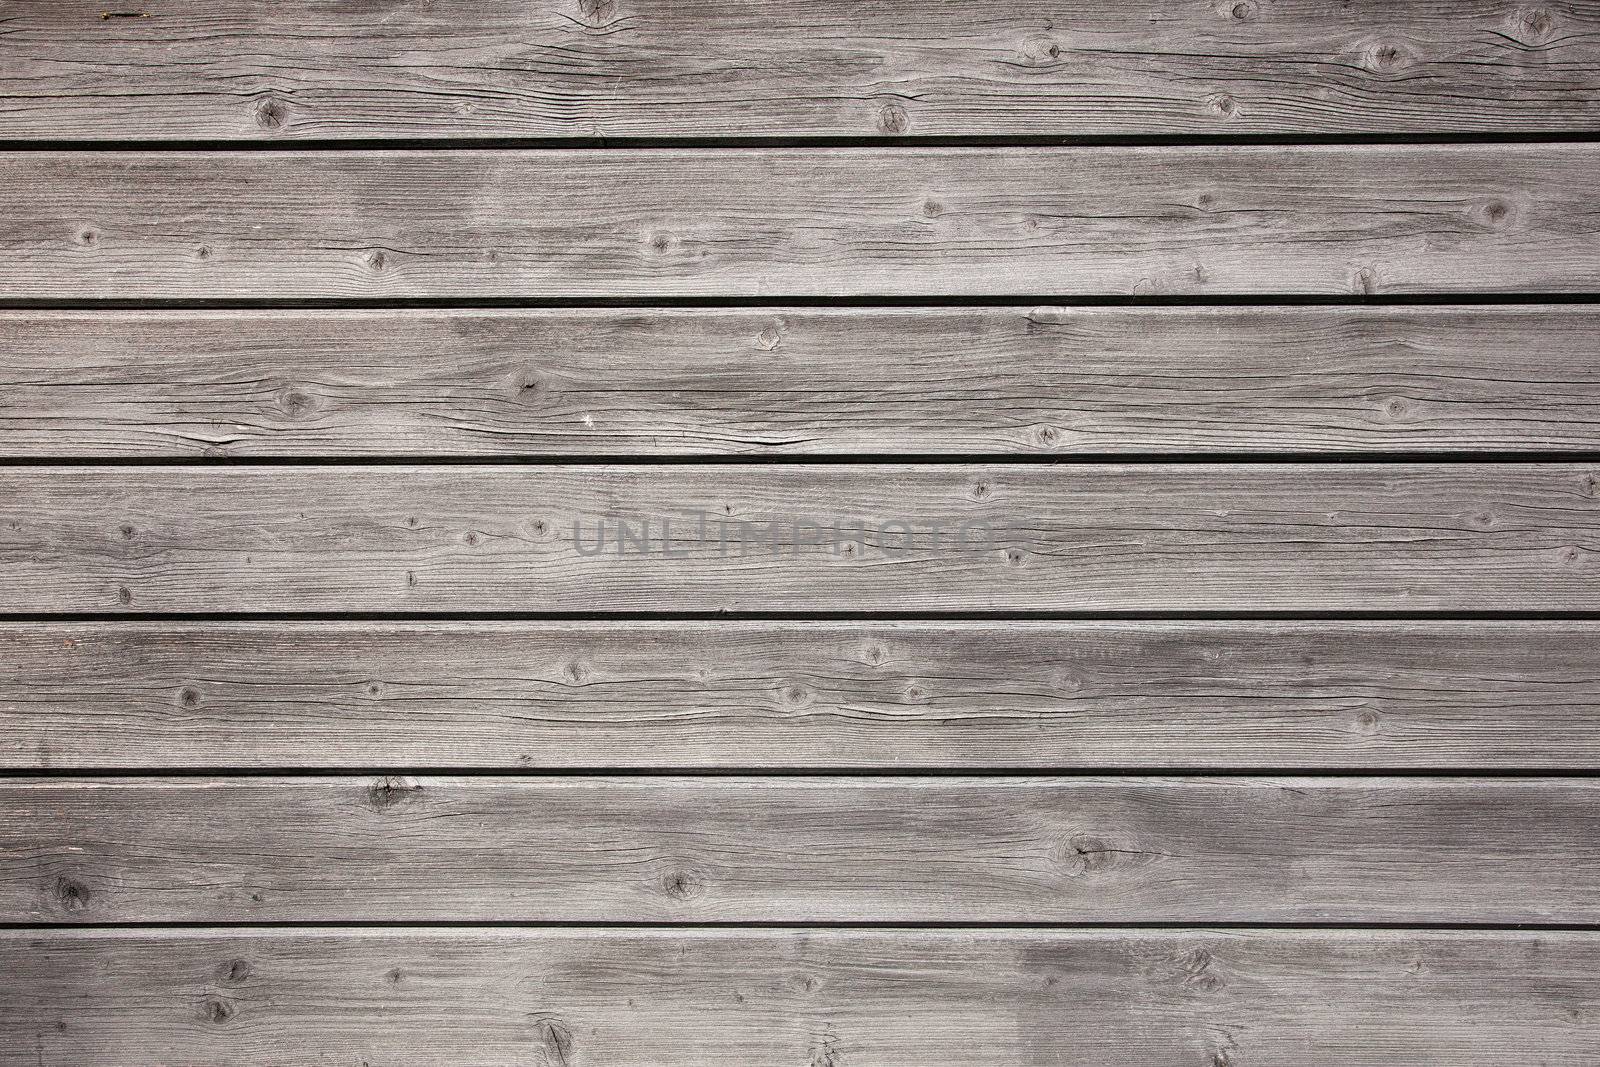 weathered grey boards of fencing or boarding